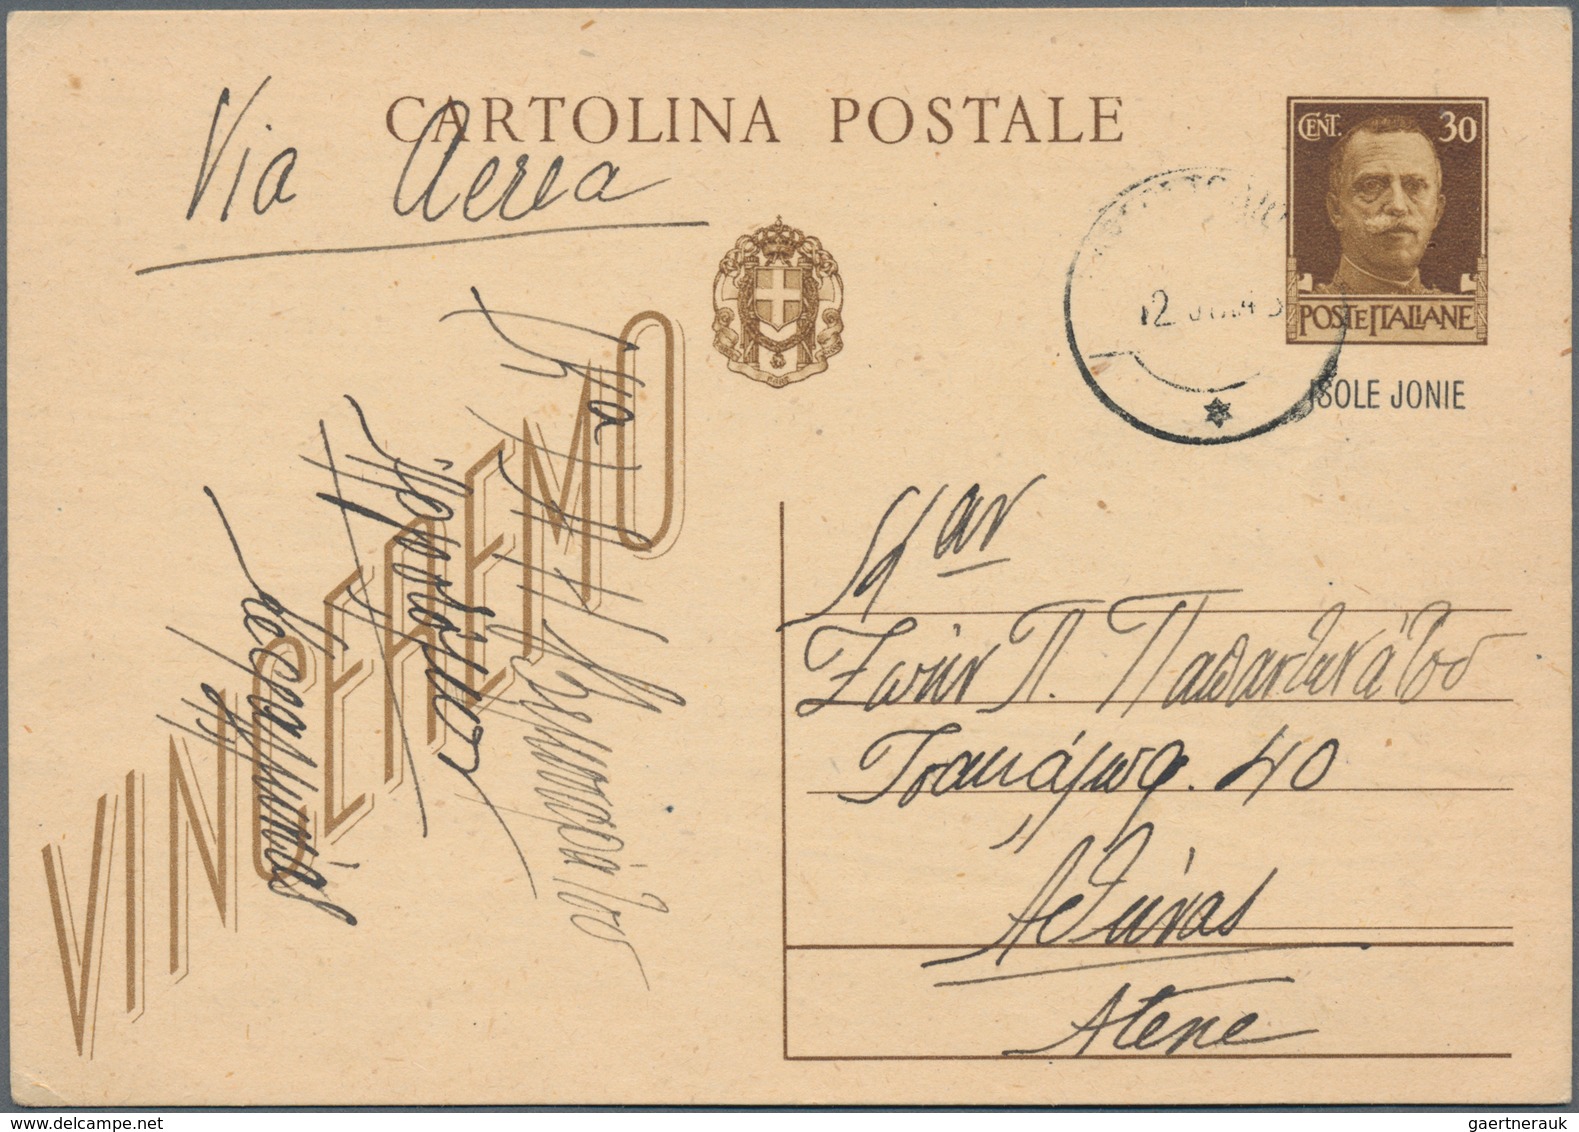 Italien: 1903/1945, 57 covers and cards on collector's pages, containing Ionian Islands, PAQUEBOT,mi